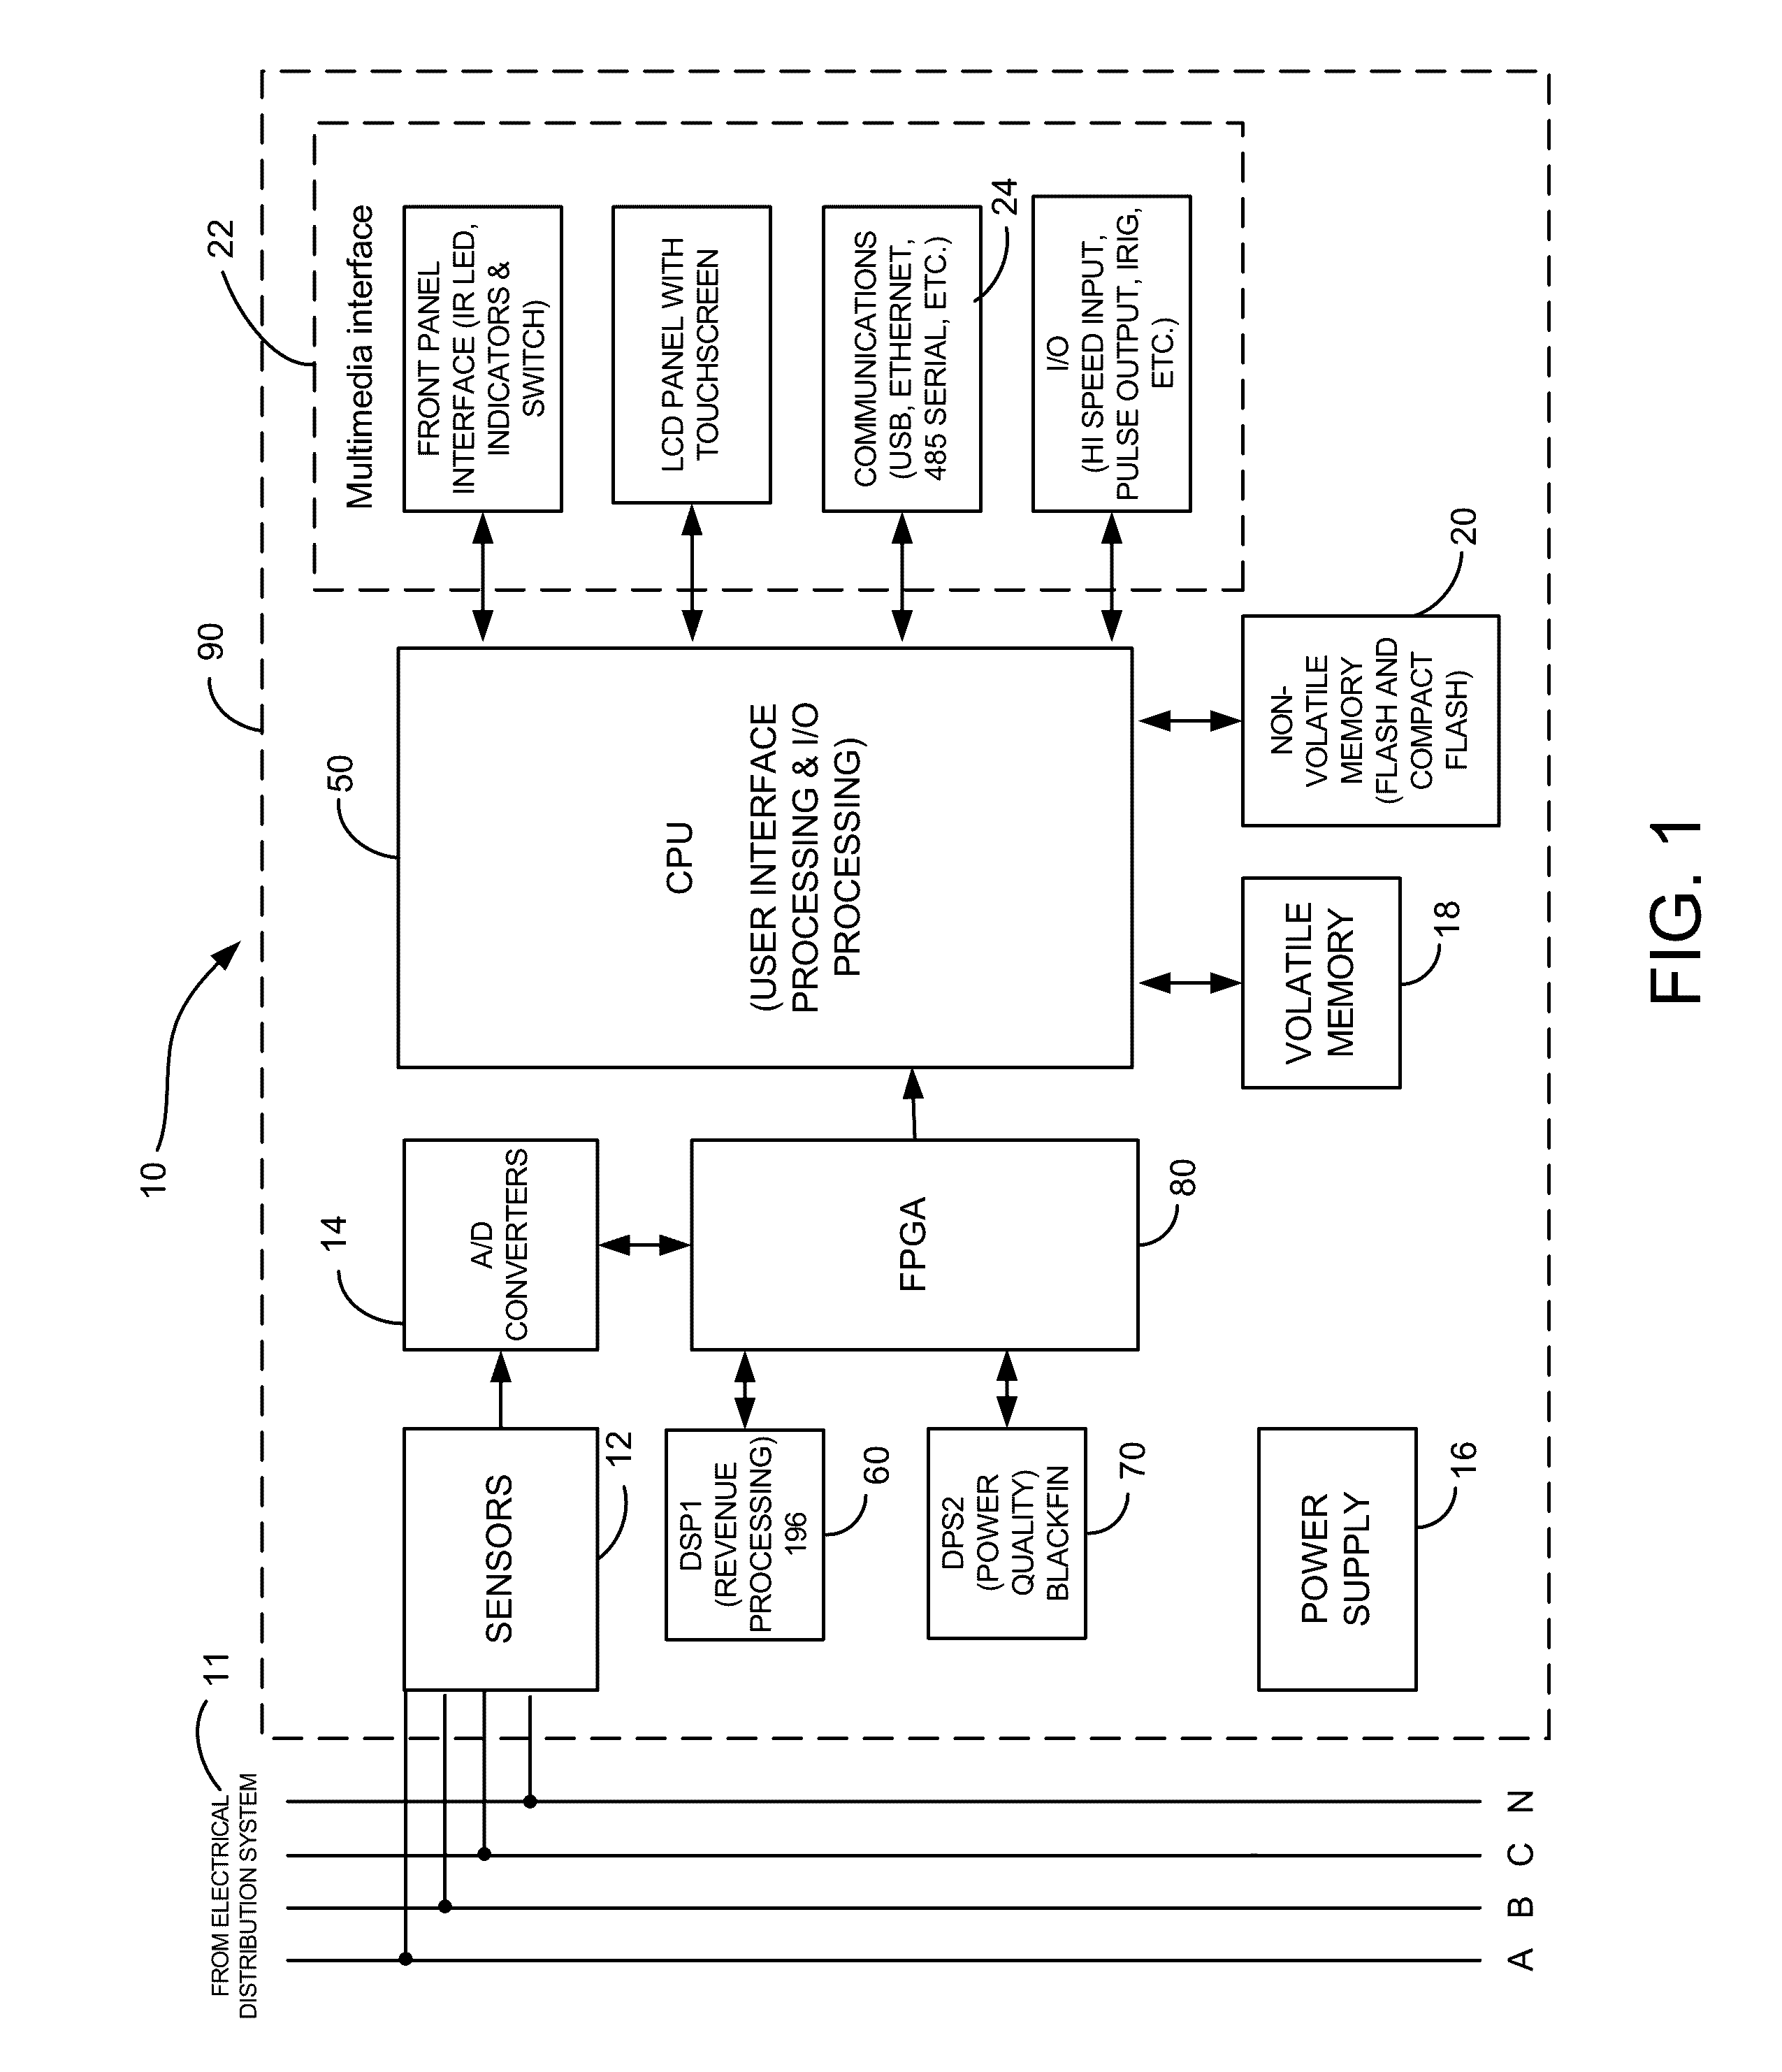 Intelligent electronic devices, systems and methods for communicating messages over a network